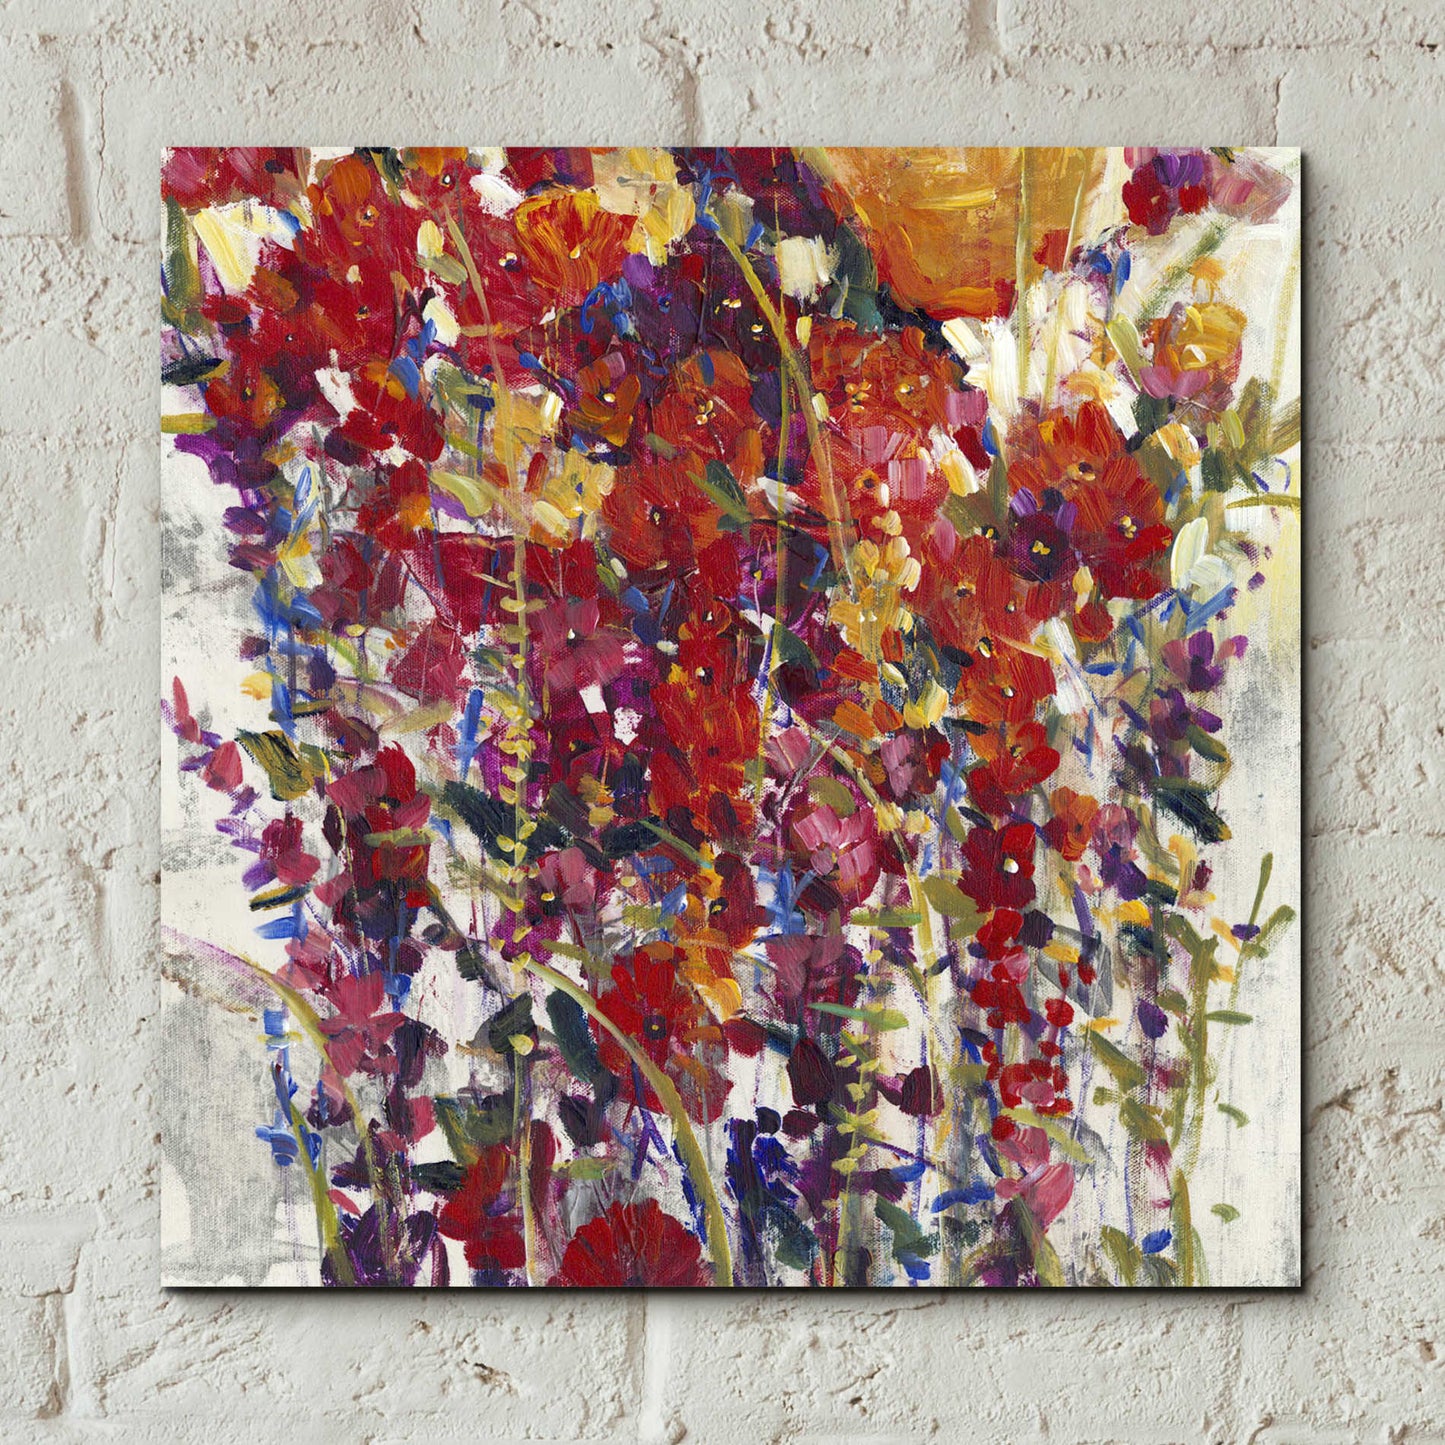 Epic Art 'Mixed Bouquet IV' by Tim O'Toole, Acrylic Glass Wall Art,12x12